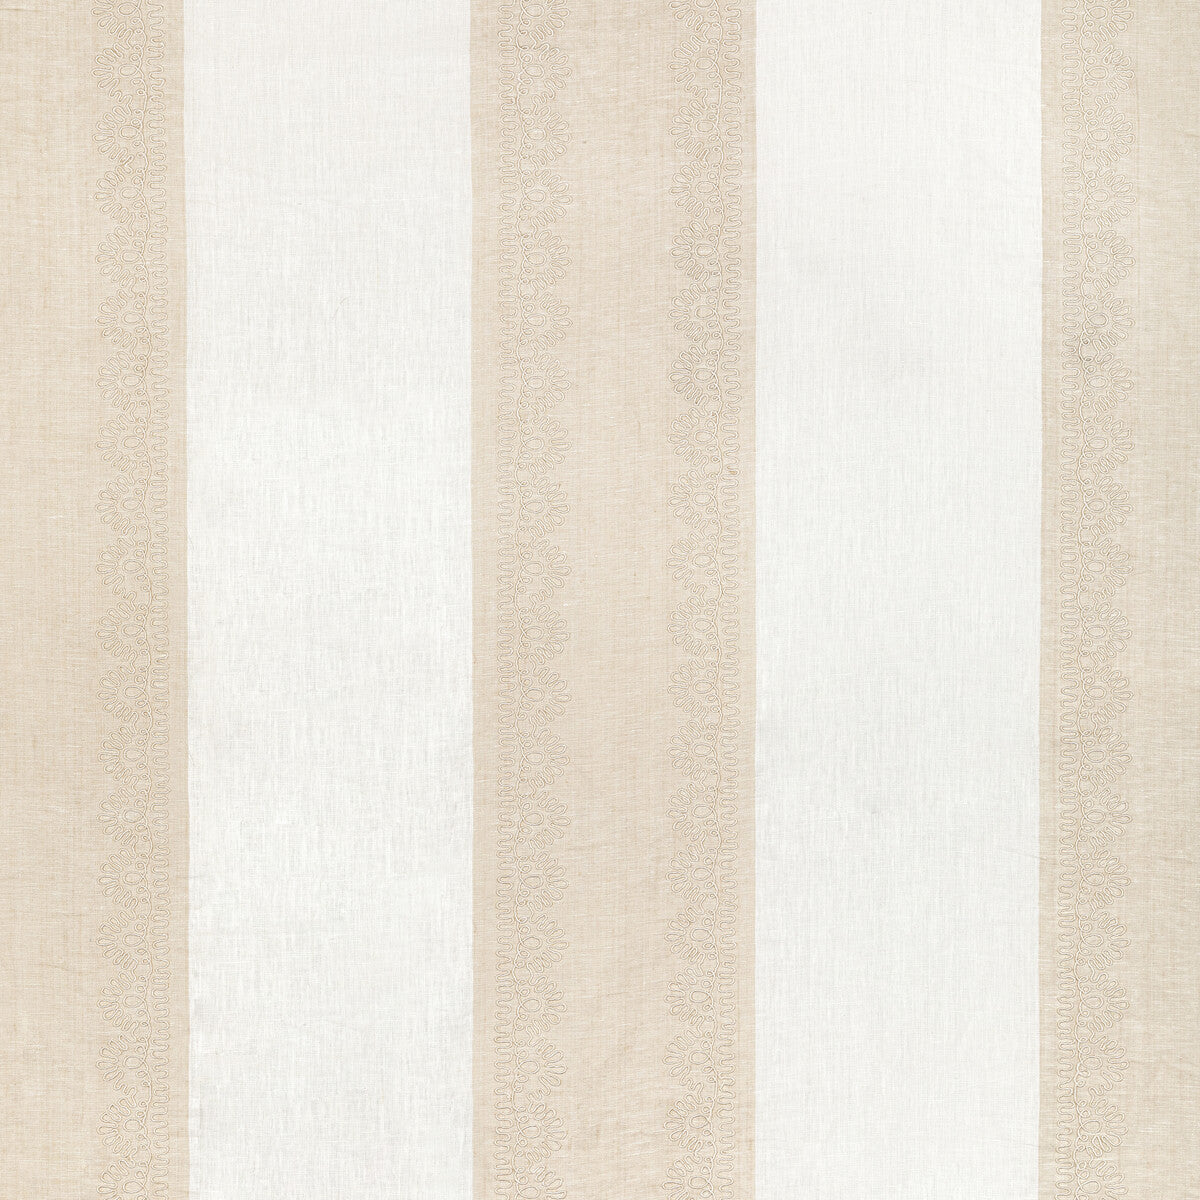 Banner Sheer fabric in buff color - pattern 2021123.116.0 - by Lee Jofa in the Summerland collection